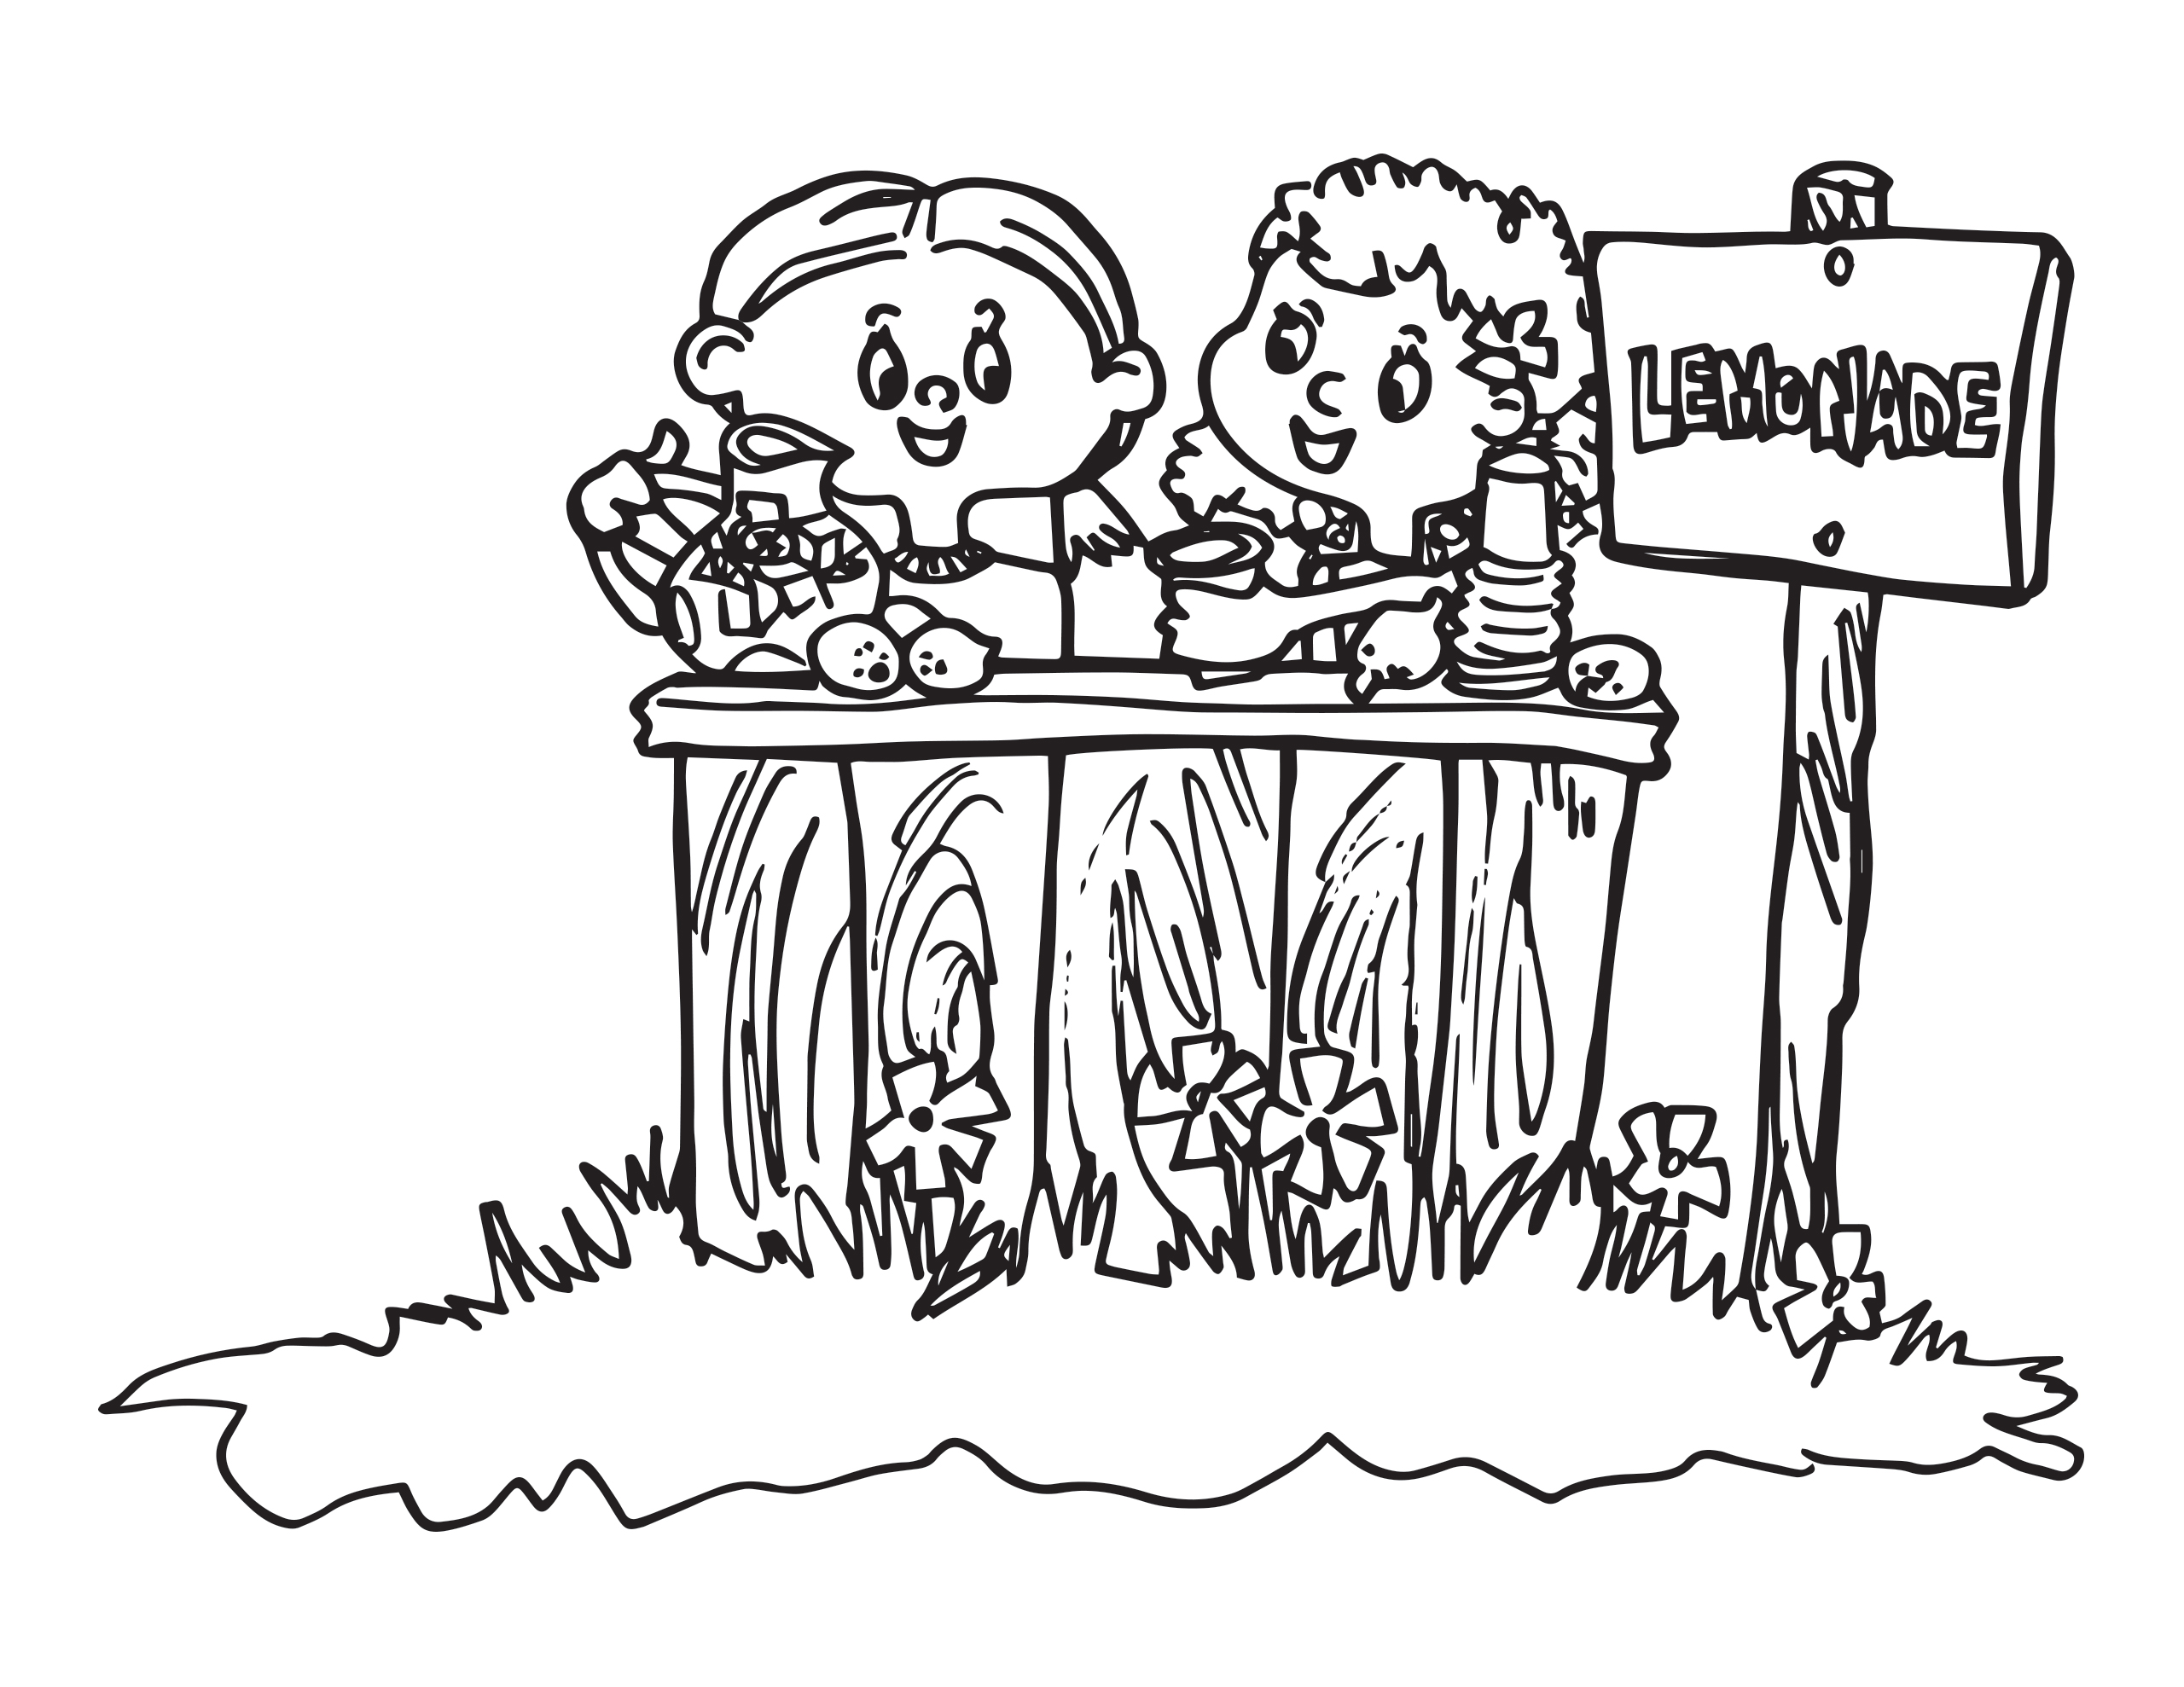 Coloring page of two girls selling lemonade